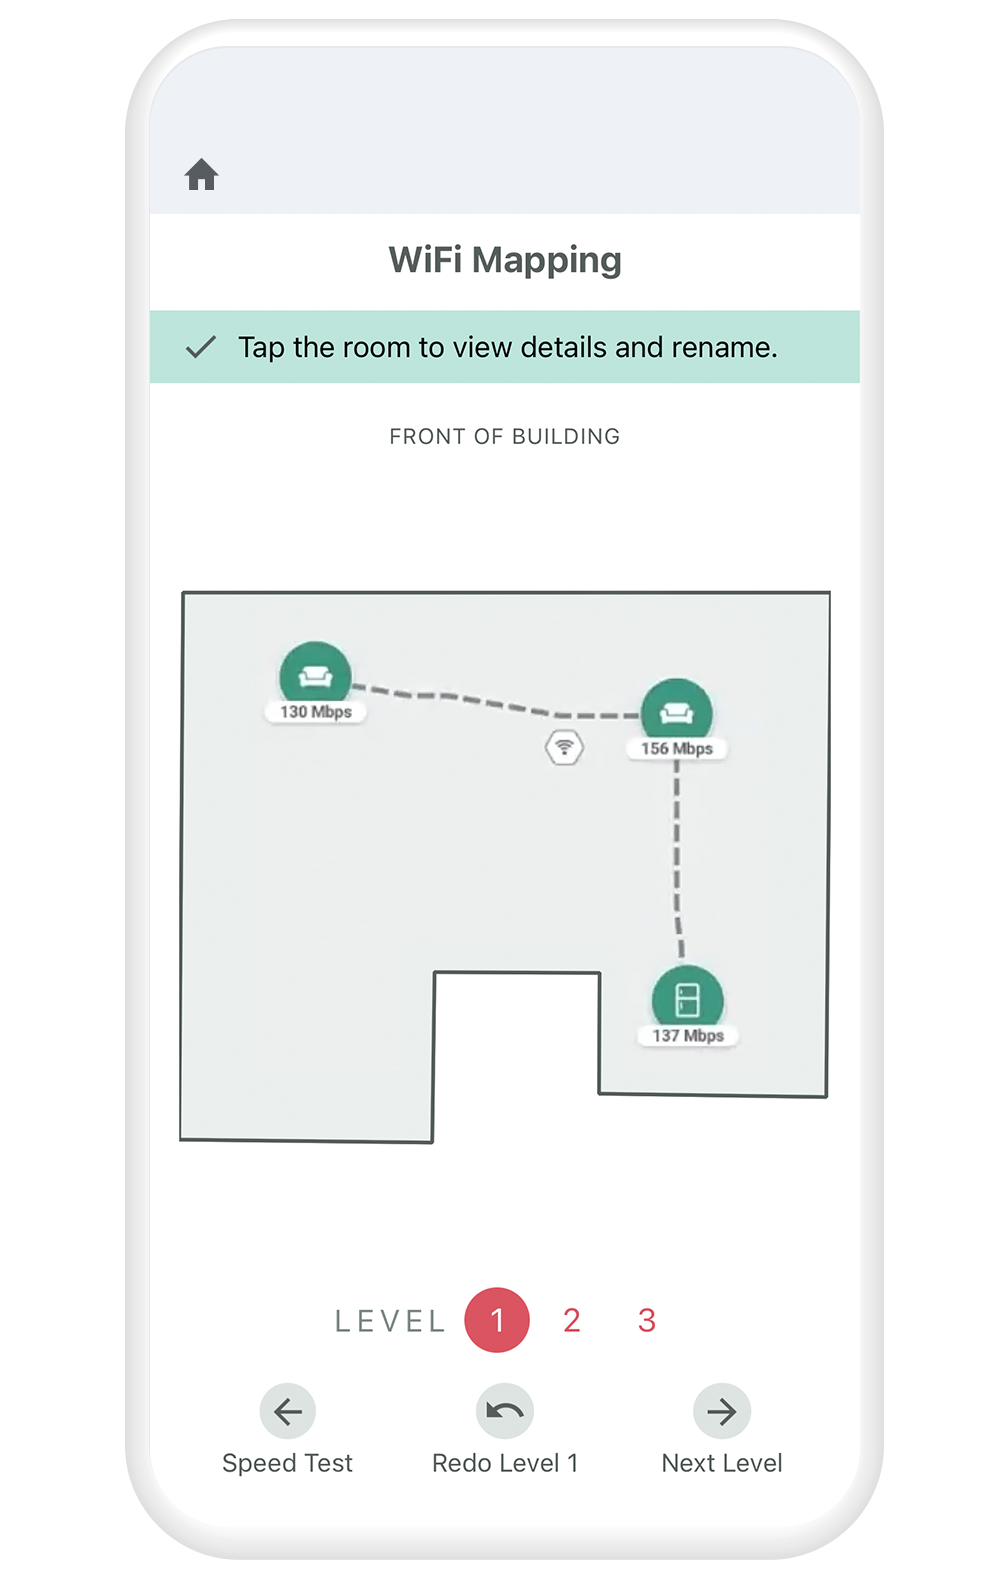 Verify network quality in every room